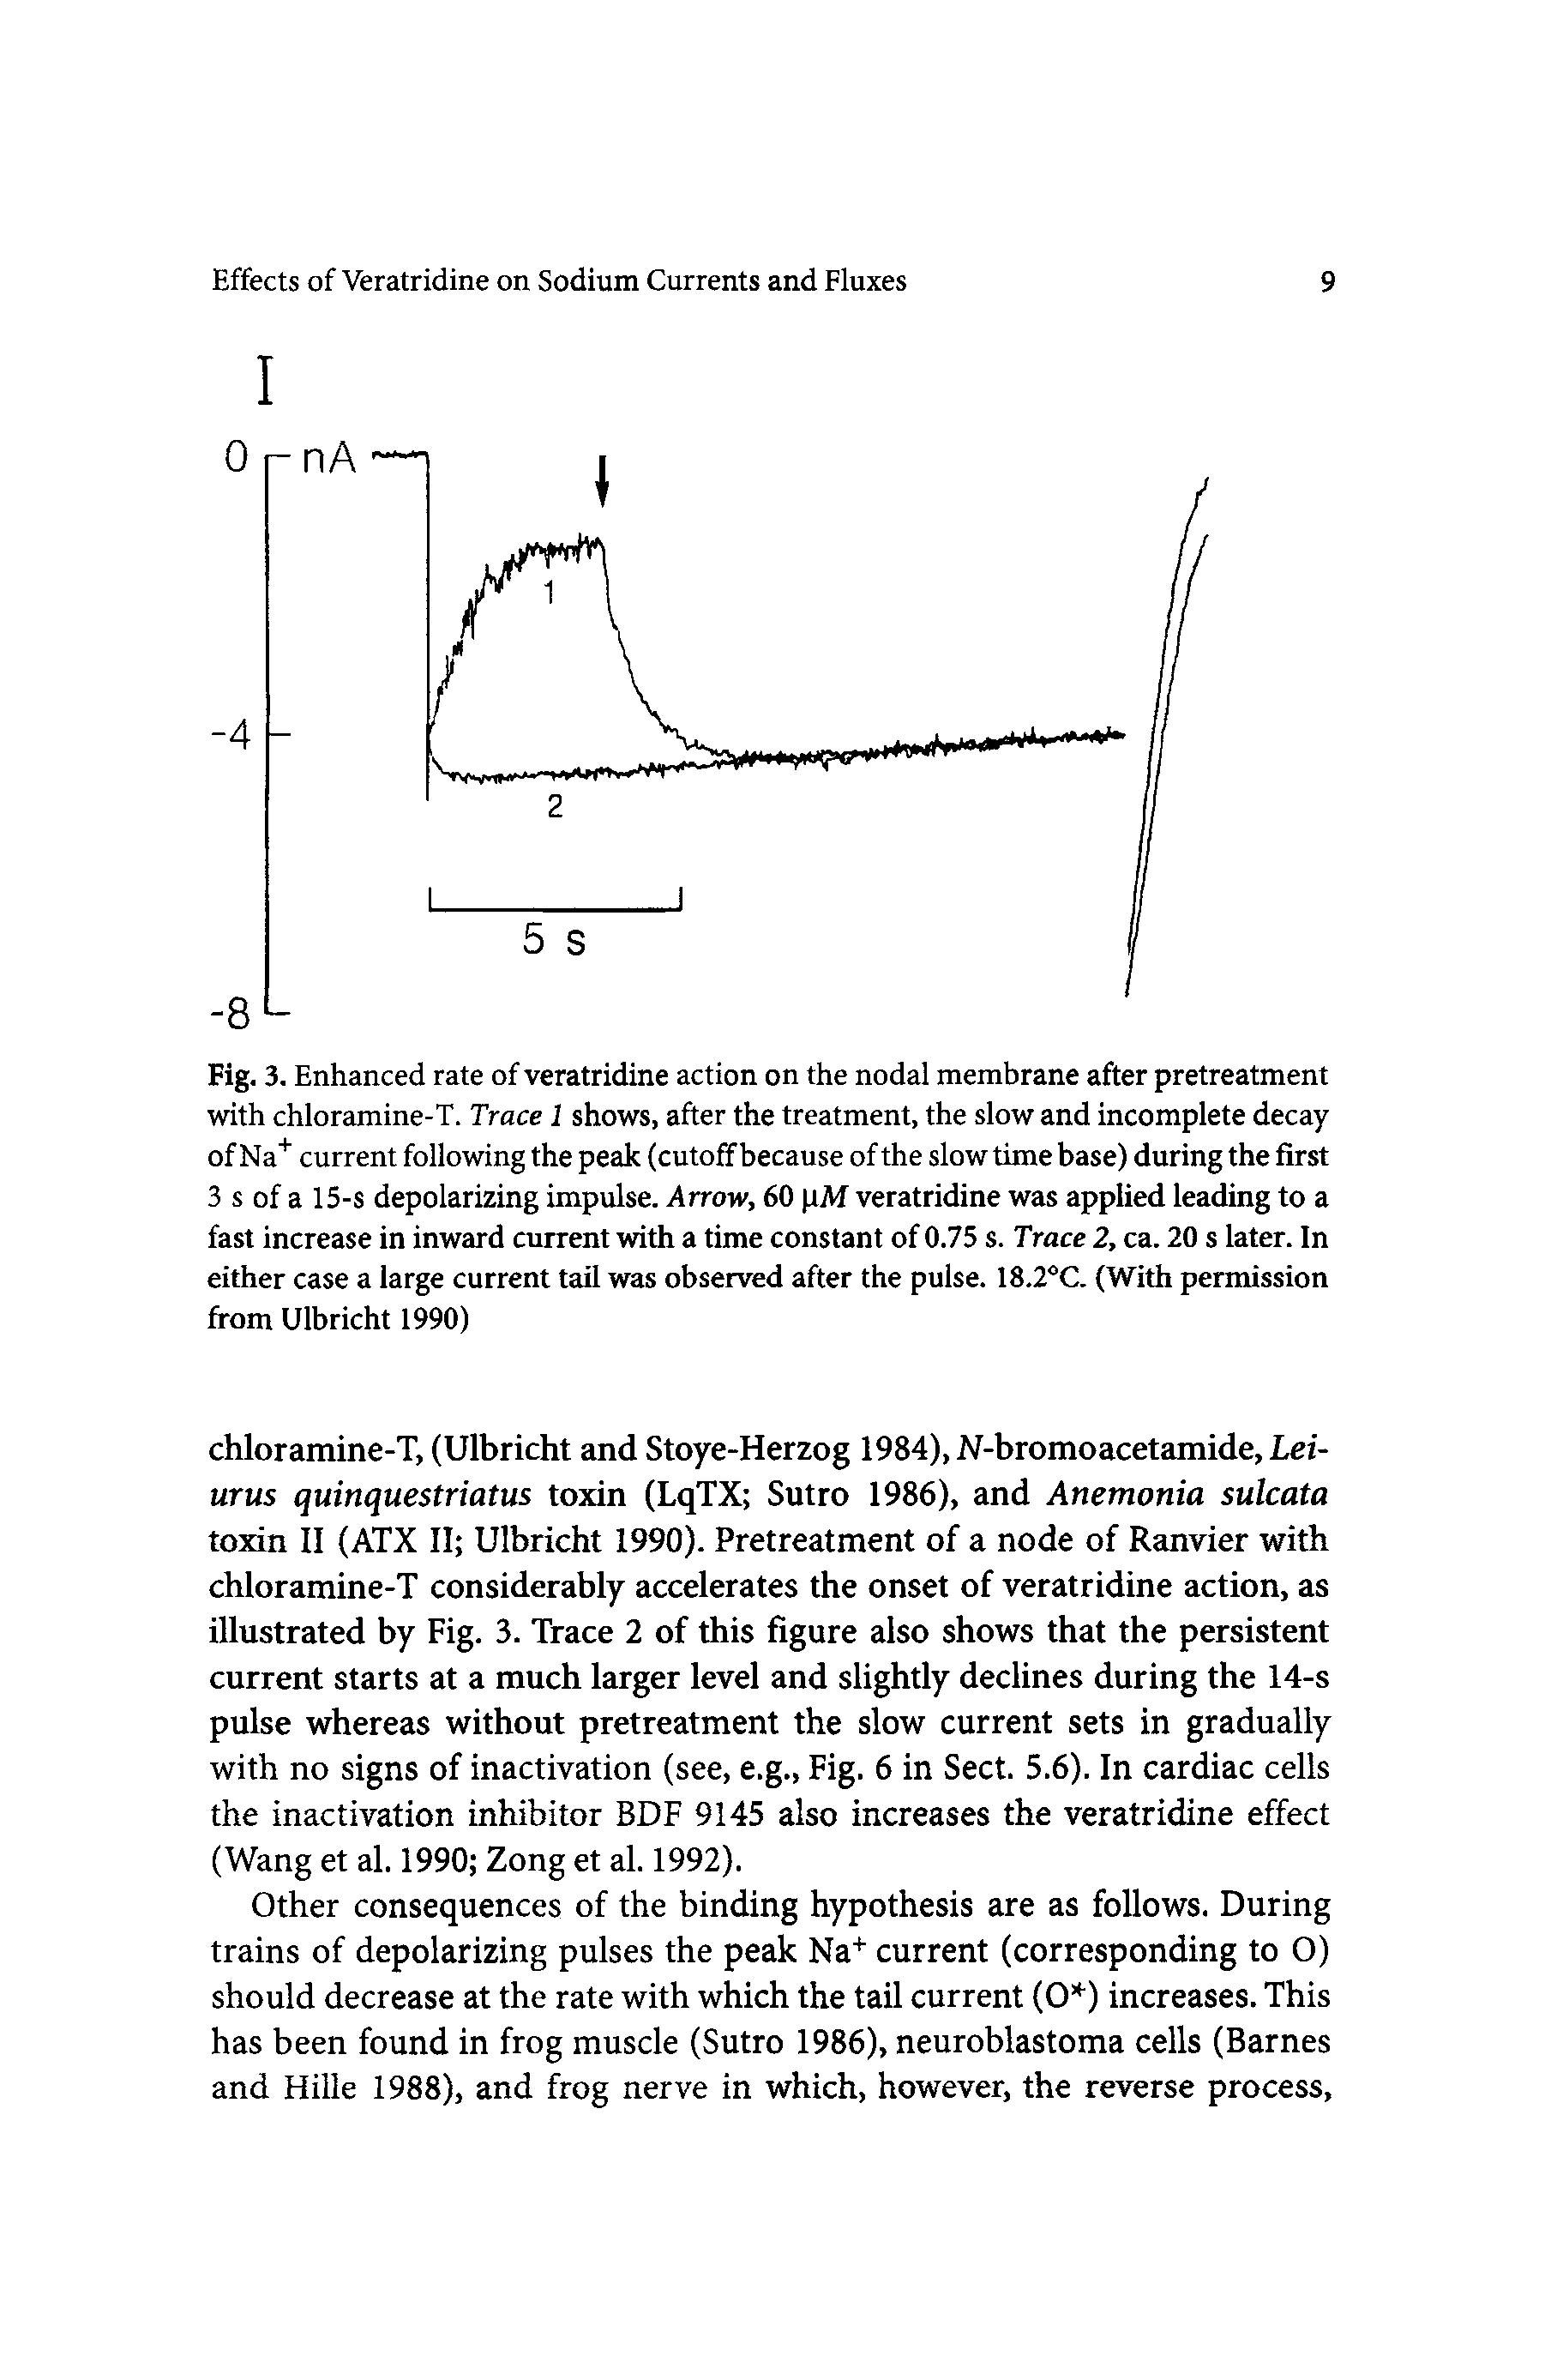 Fig. 3. Enhanced rate of veratridine action on the nodal membrane after pretreatment with chloramine-T. Trace 1 shows, after the treatment, the slow and incomplete decay of Na current following the peak (cutoff because of the slow time base) during the first 3 s of a 15-s depolarizing impulse. Arrow, 60 pM veratridine was applied leading to a fast increase in inward current with a time constant of 0.75 s. Trace 2, ca. 20 s later. In either case a large current tail was observed after the pulse. 18.2 C. (With permission from Ulbricht 1990)...